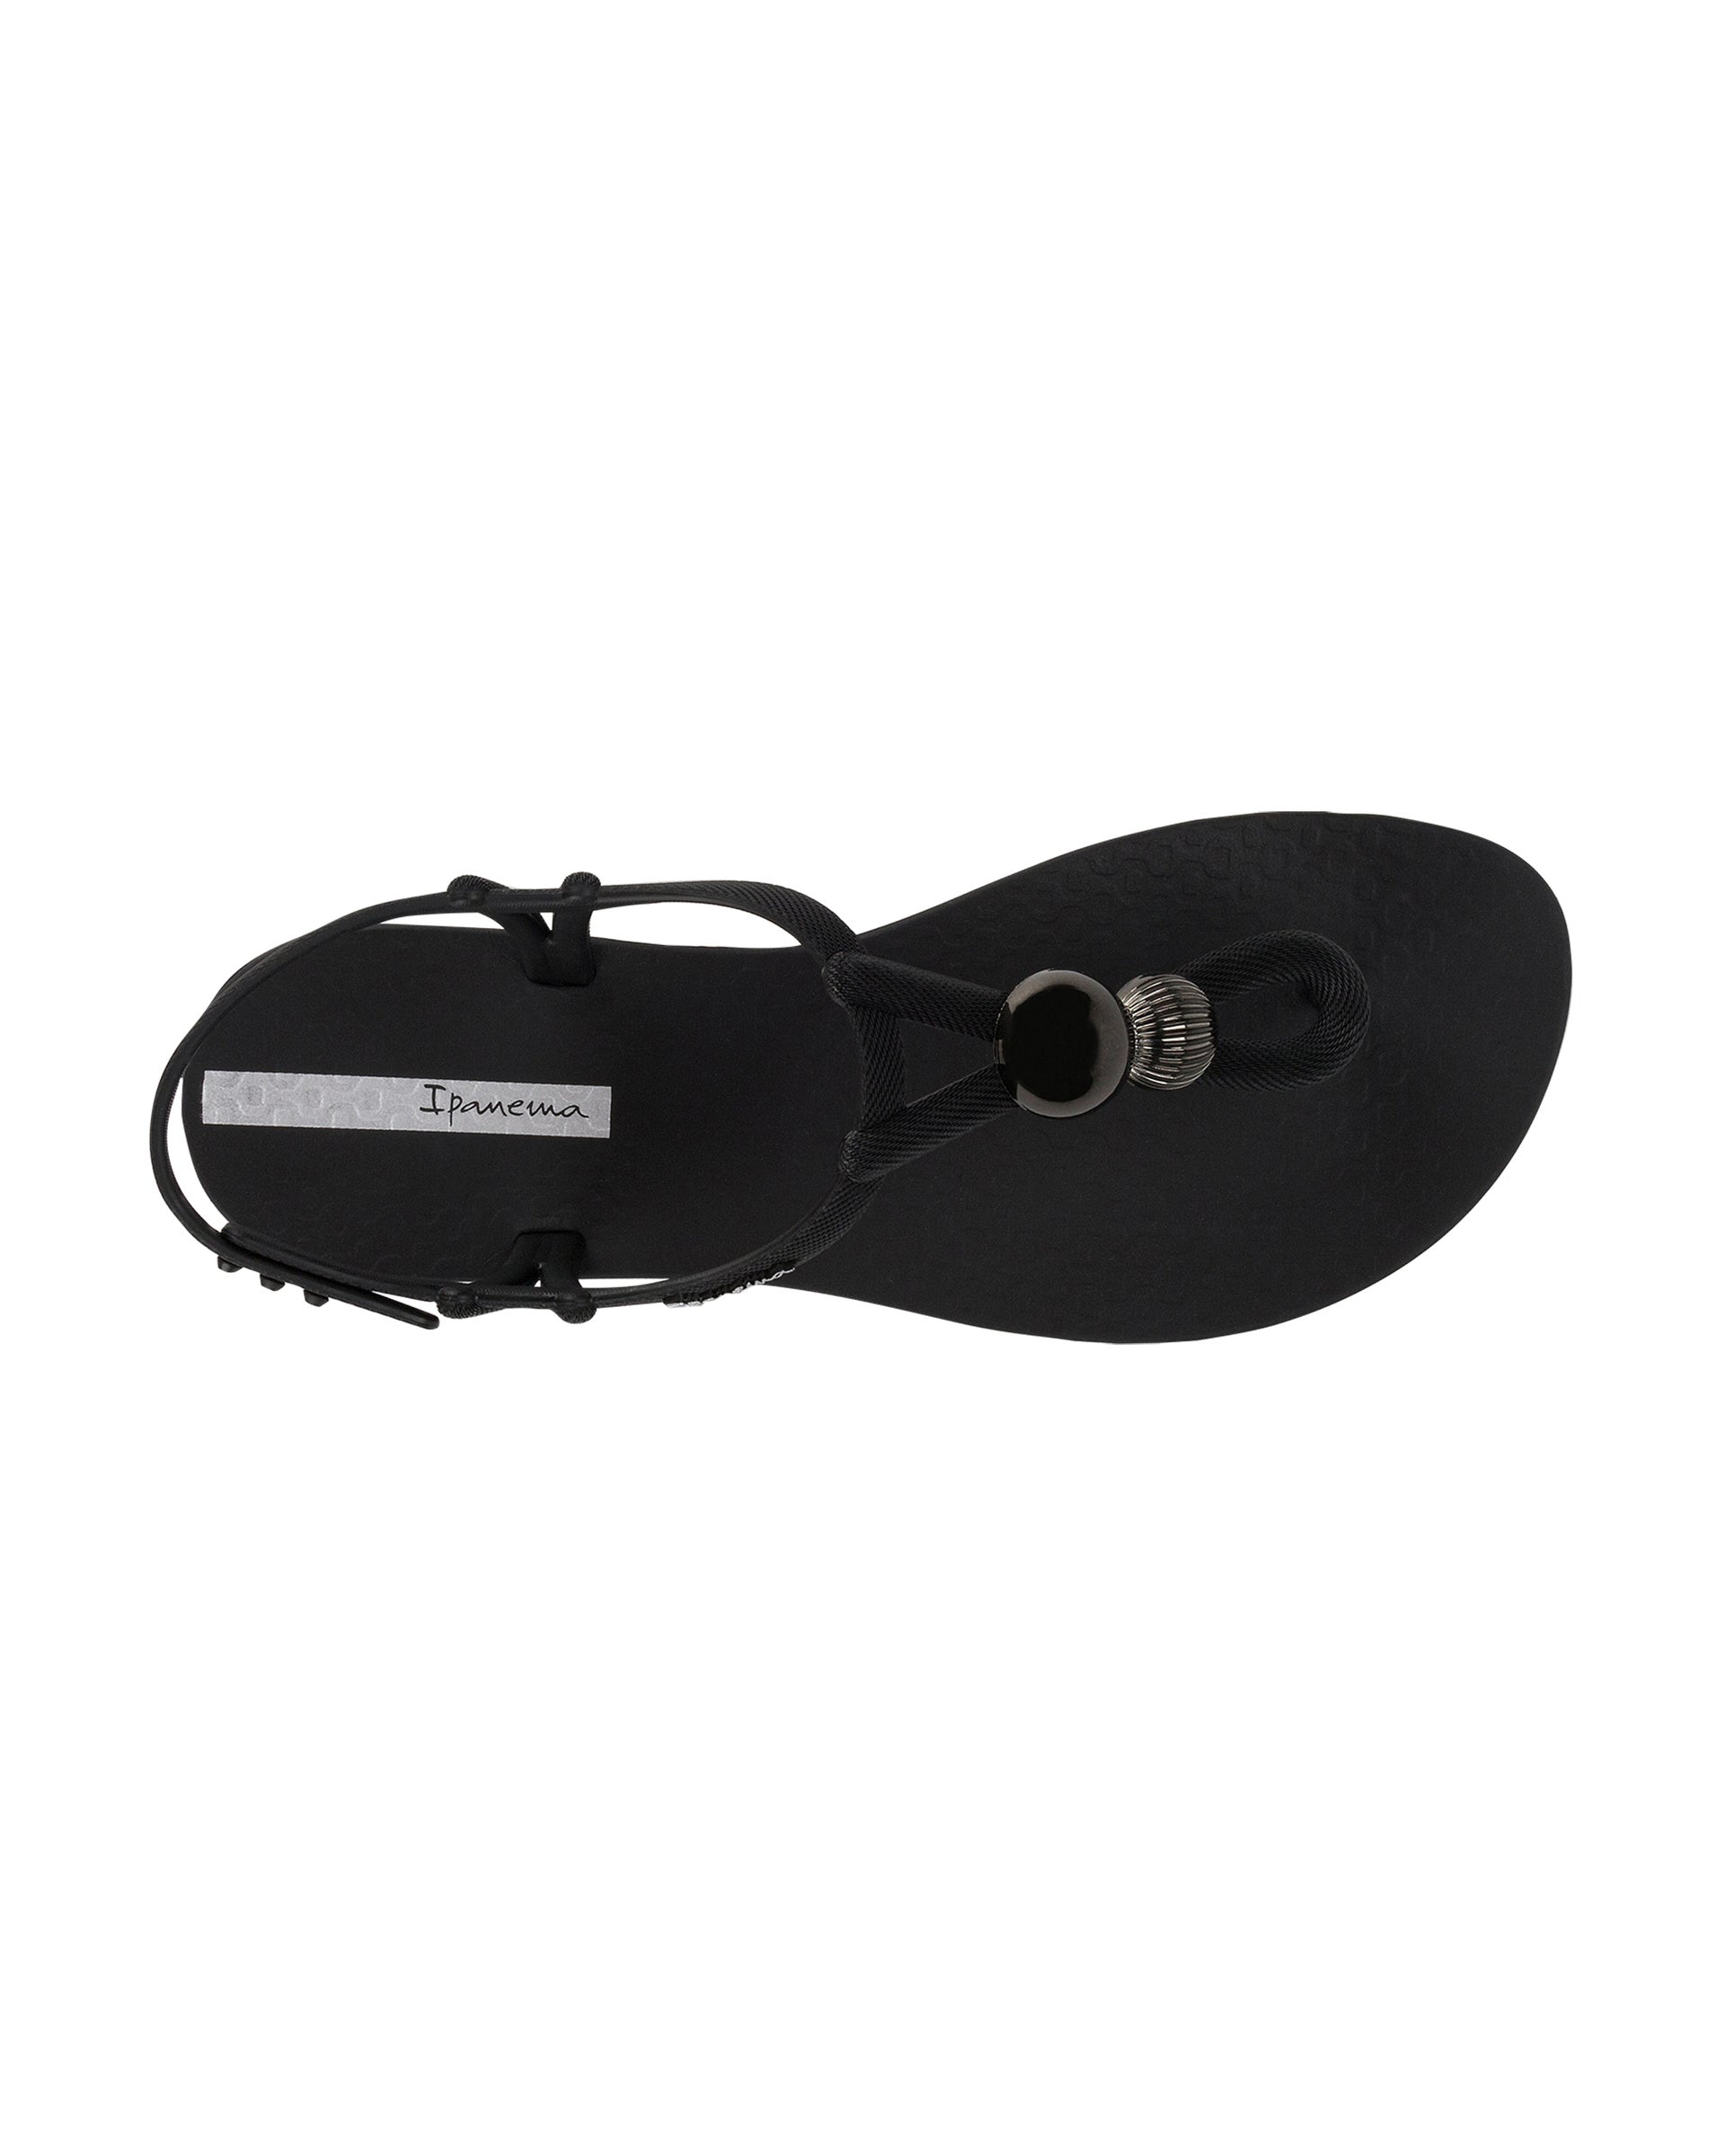 Top view of a black Ipanema Class Spheres women's t-strap sandal with metallic bauble.